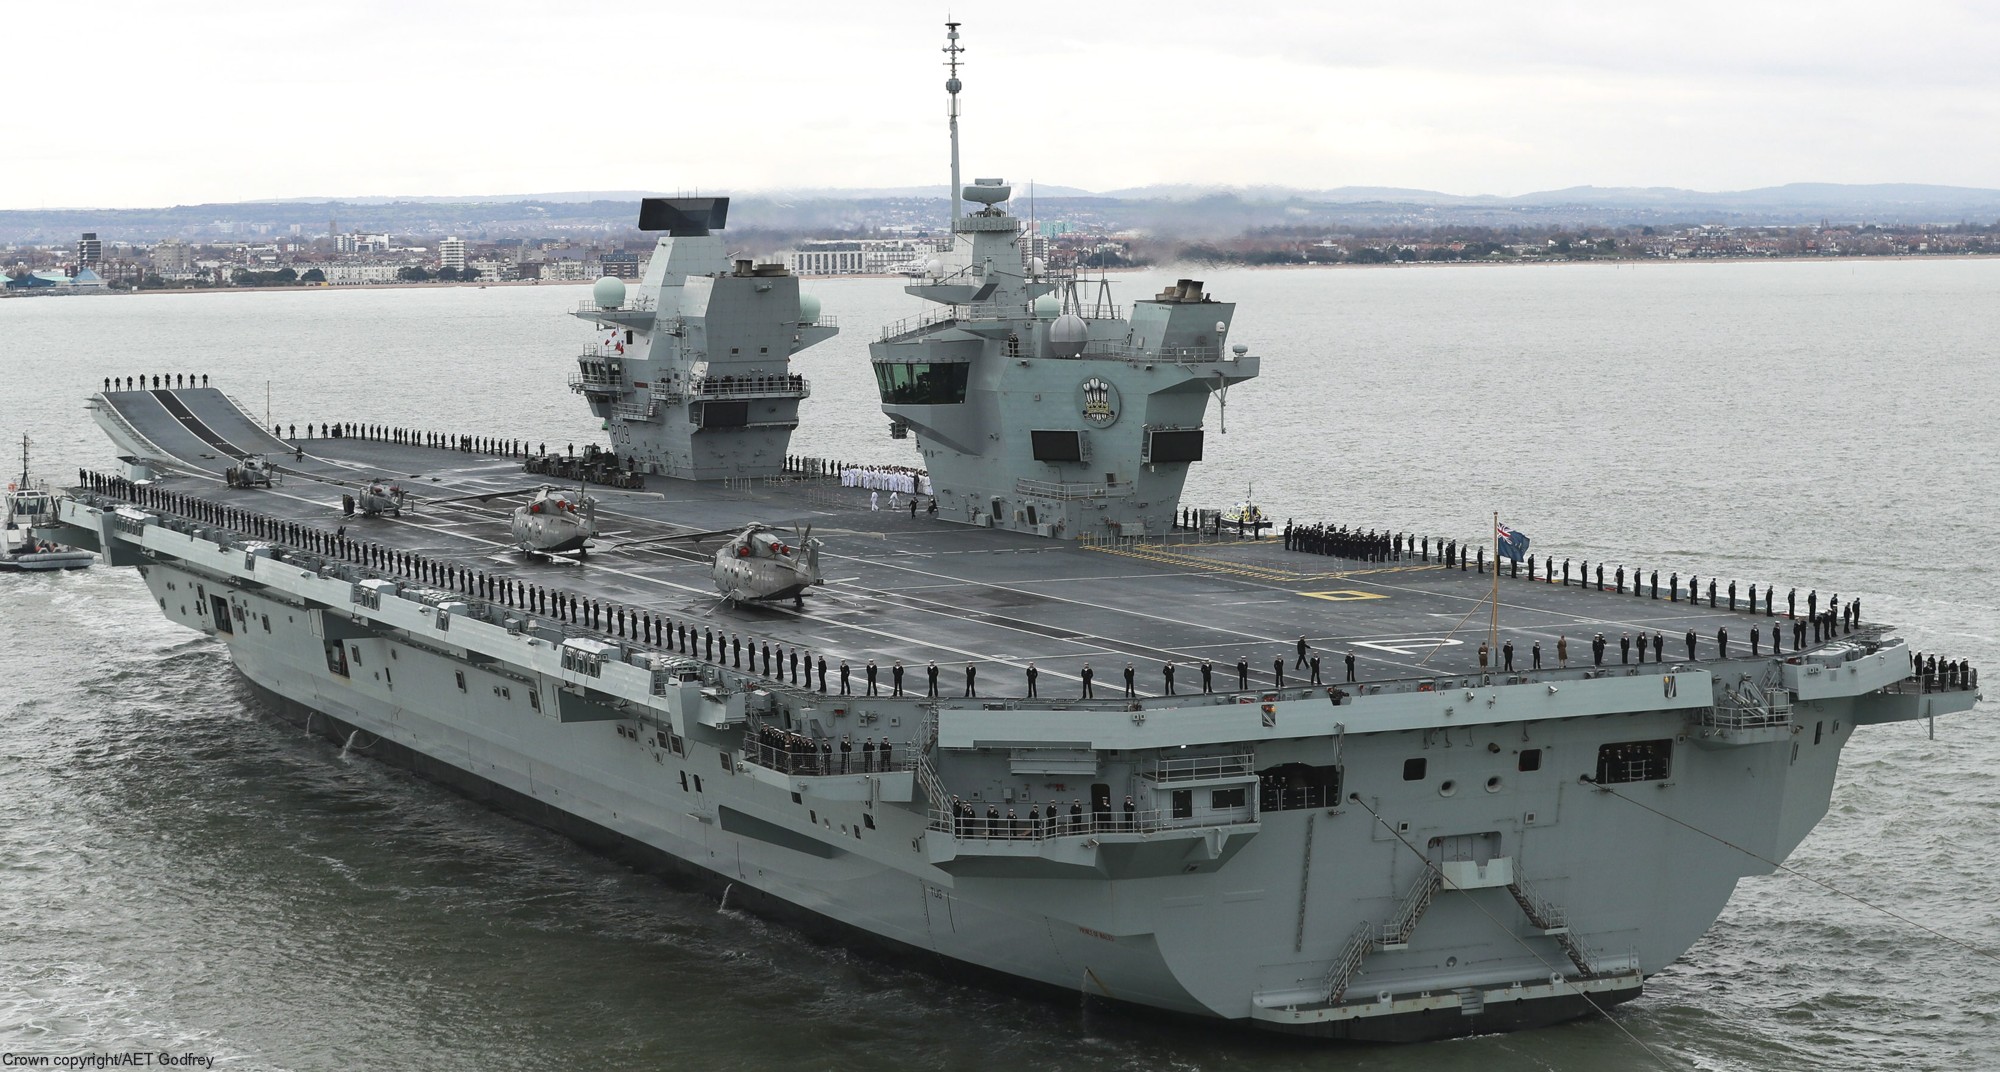 r-09 hms prince of wales queen elizabeth class aircraft carrier stovl royal navy 06x carrier alliance bae